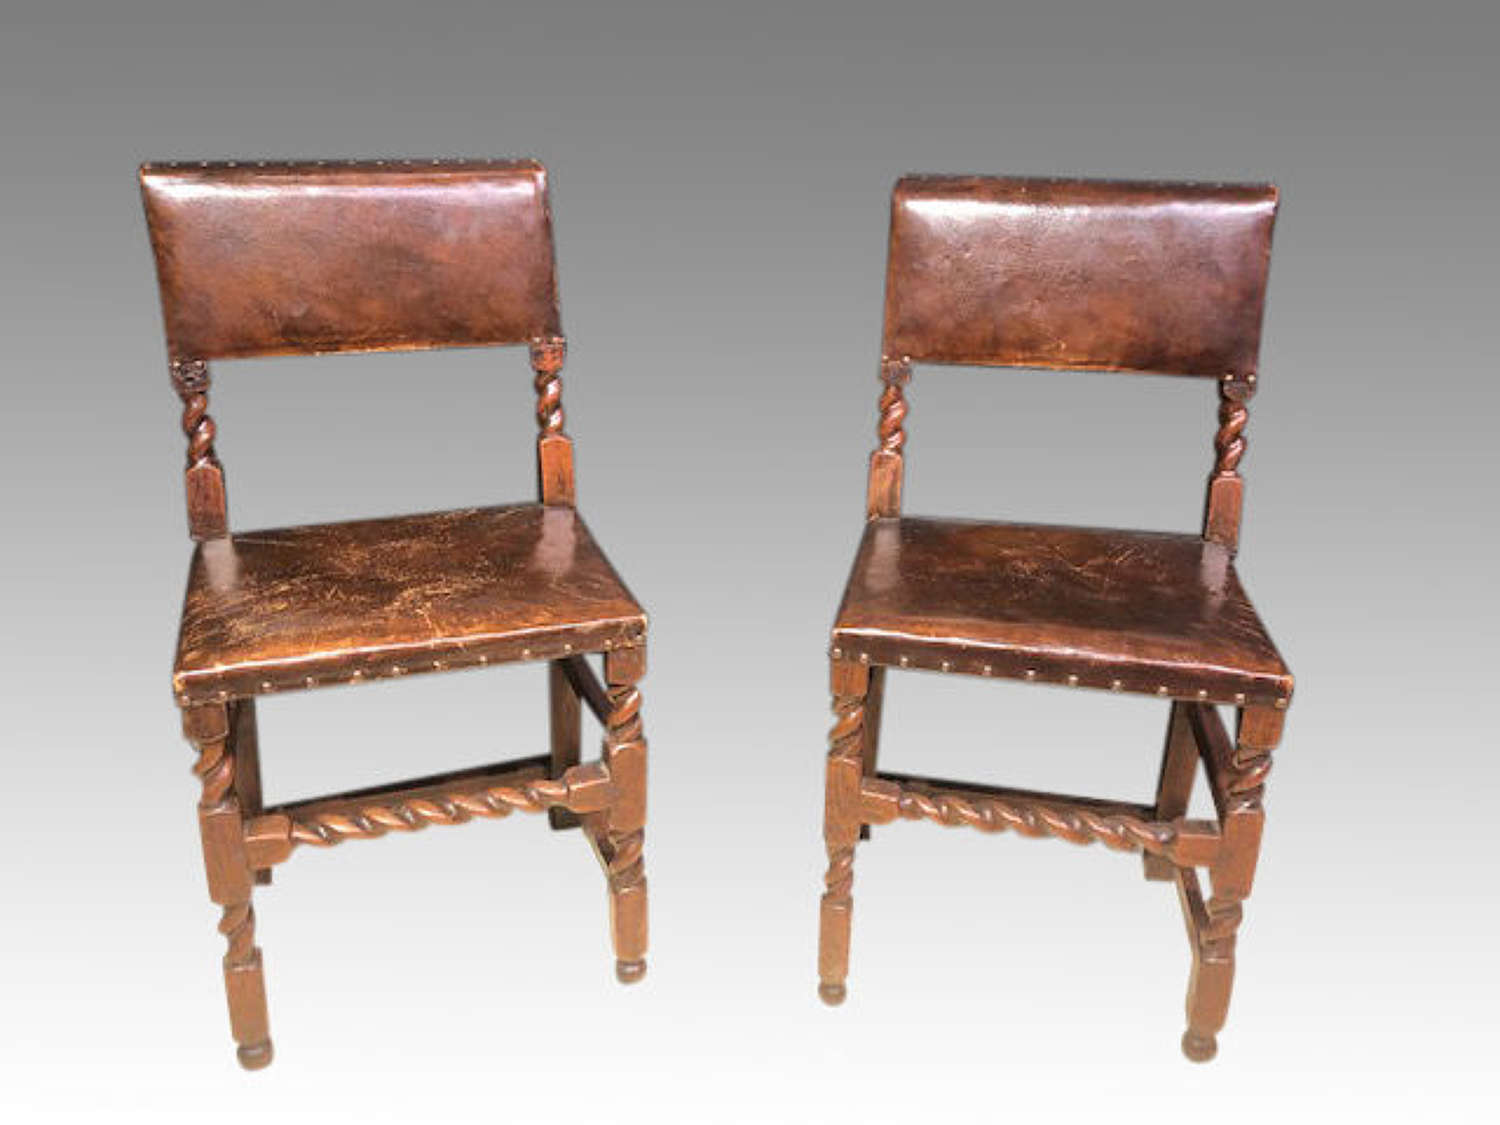 Pair of 17th century oak side chairs.